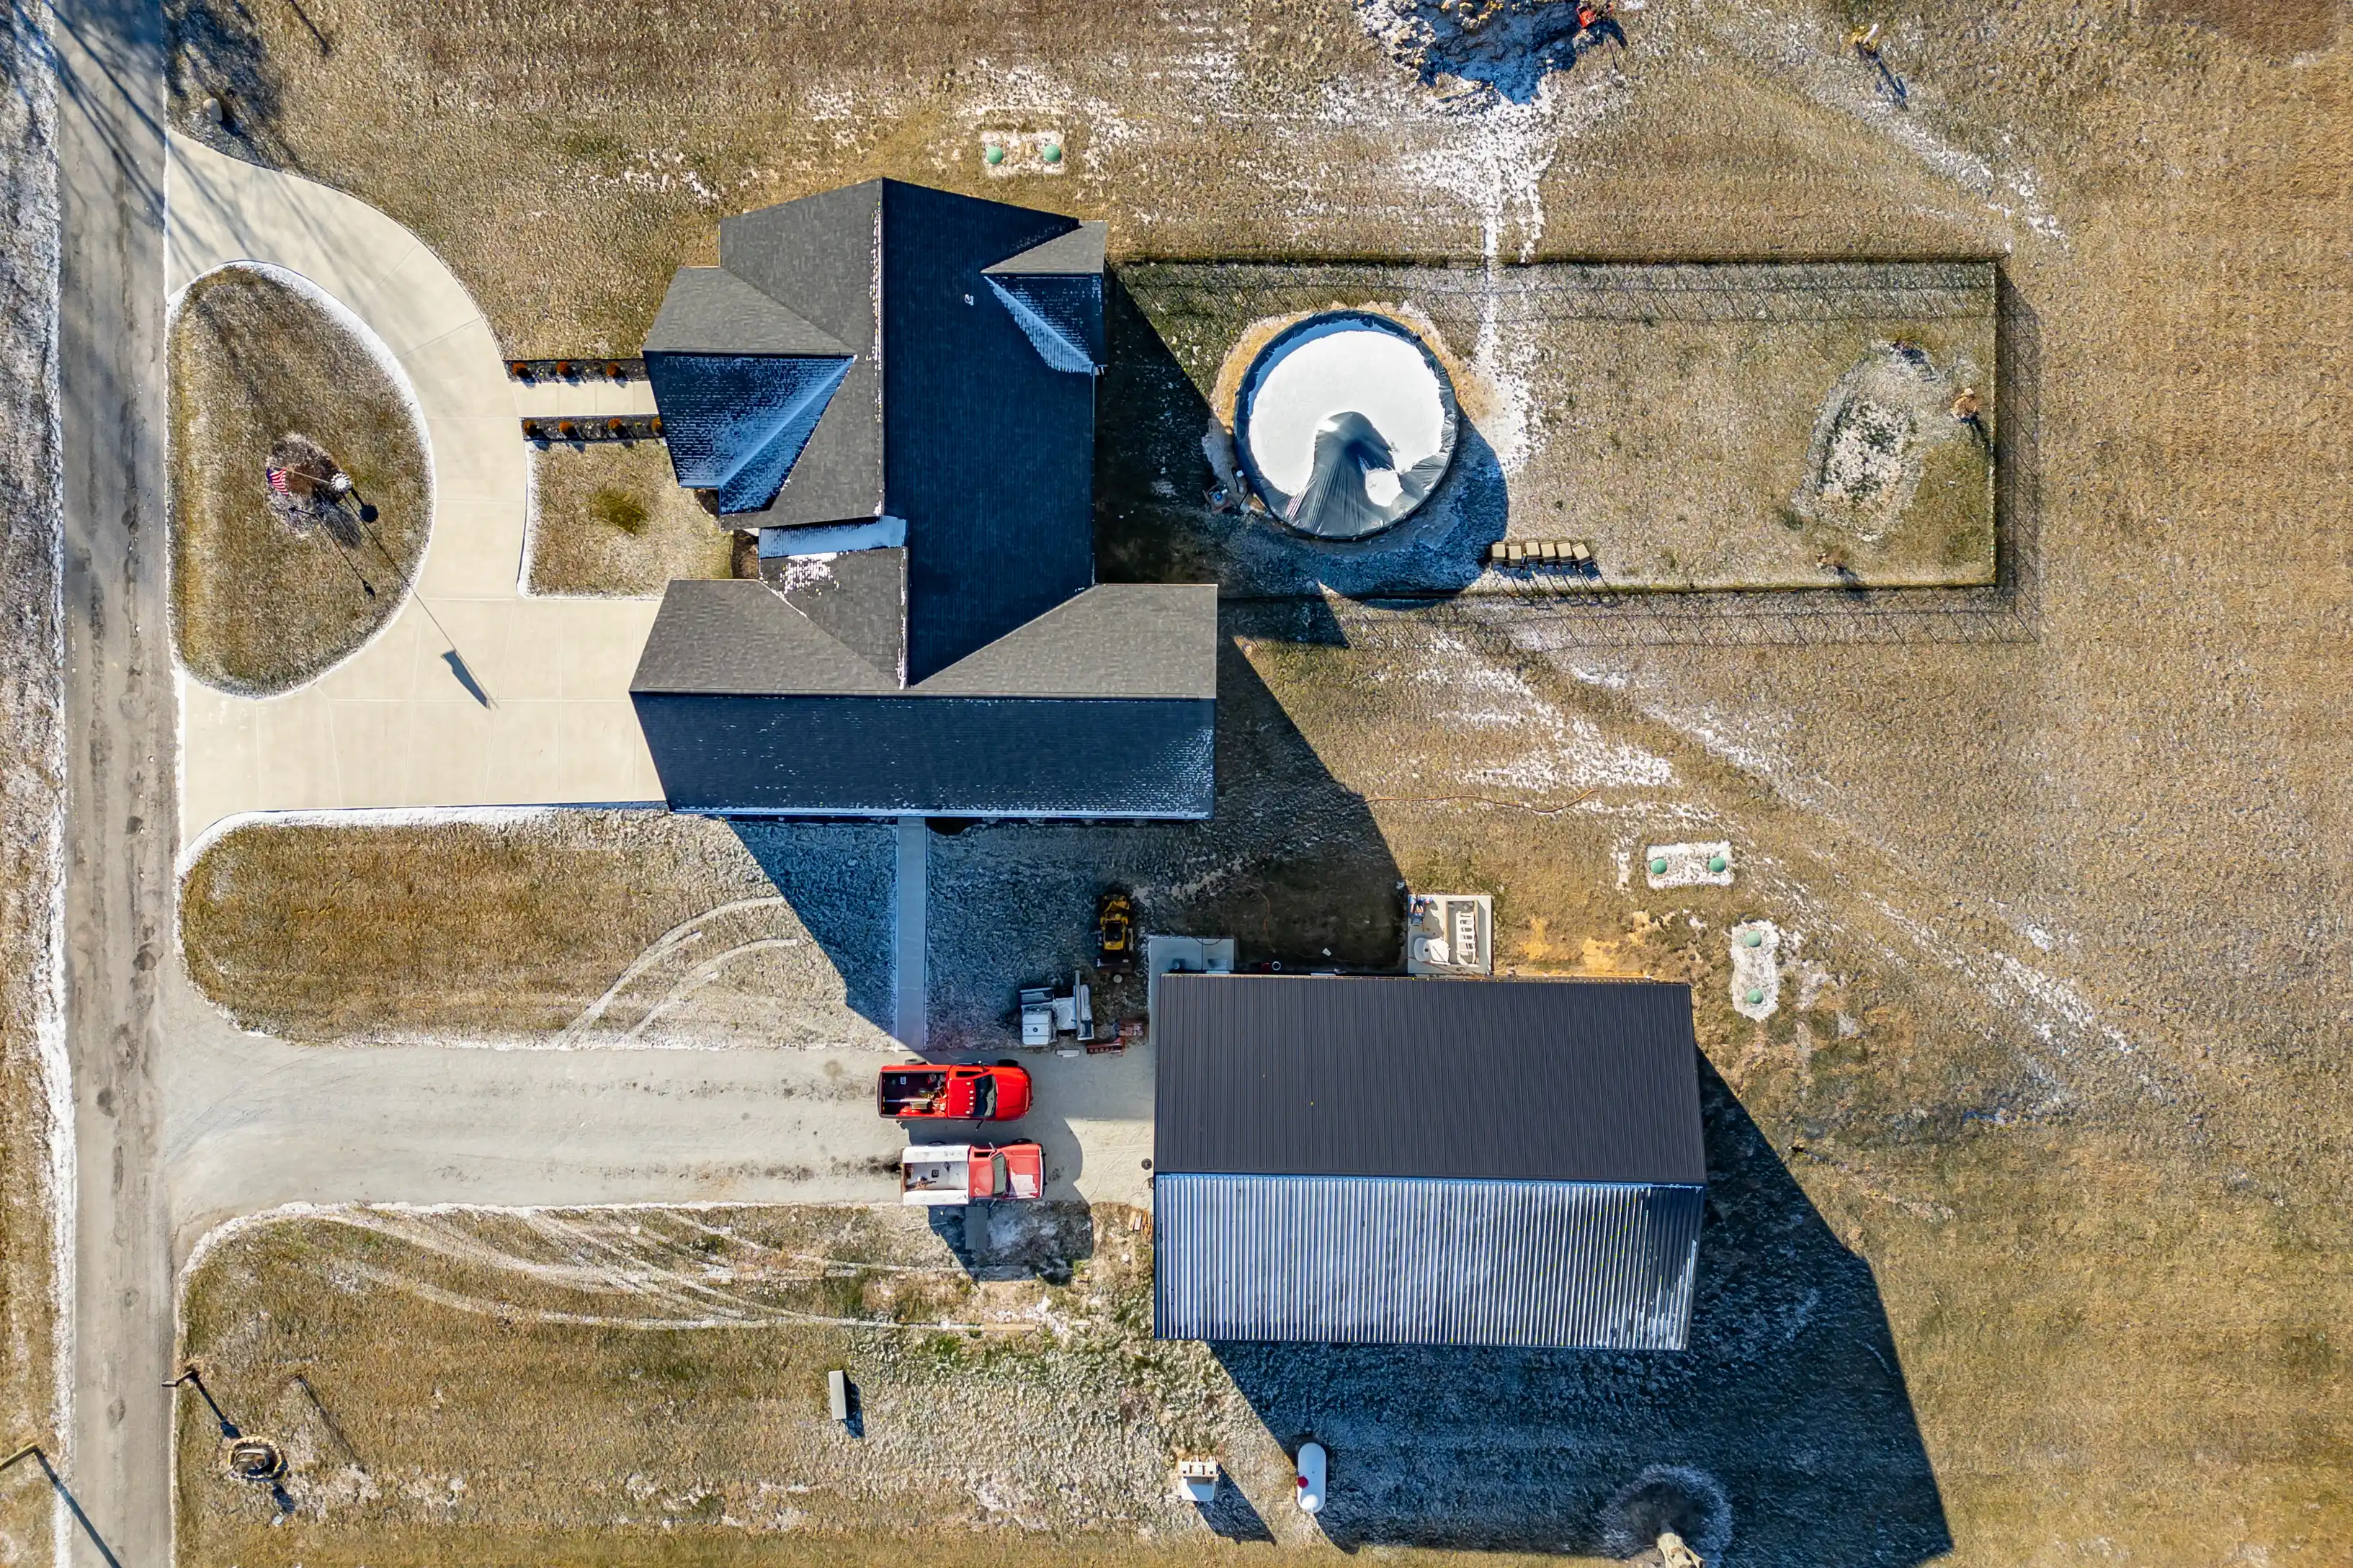 Aerial view of a rural property with a house, separate garage, curved driveway, and a silo.